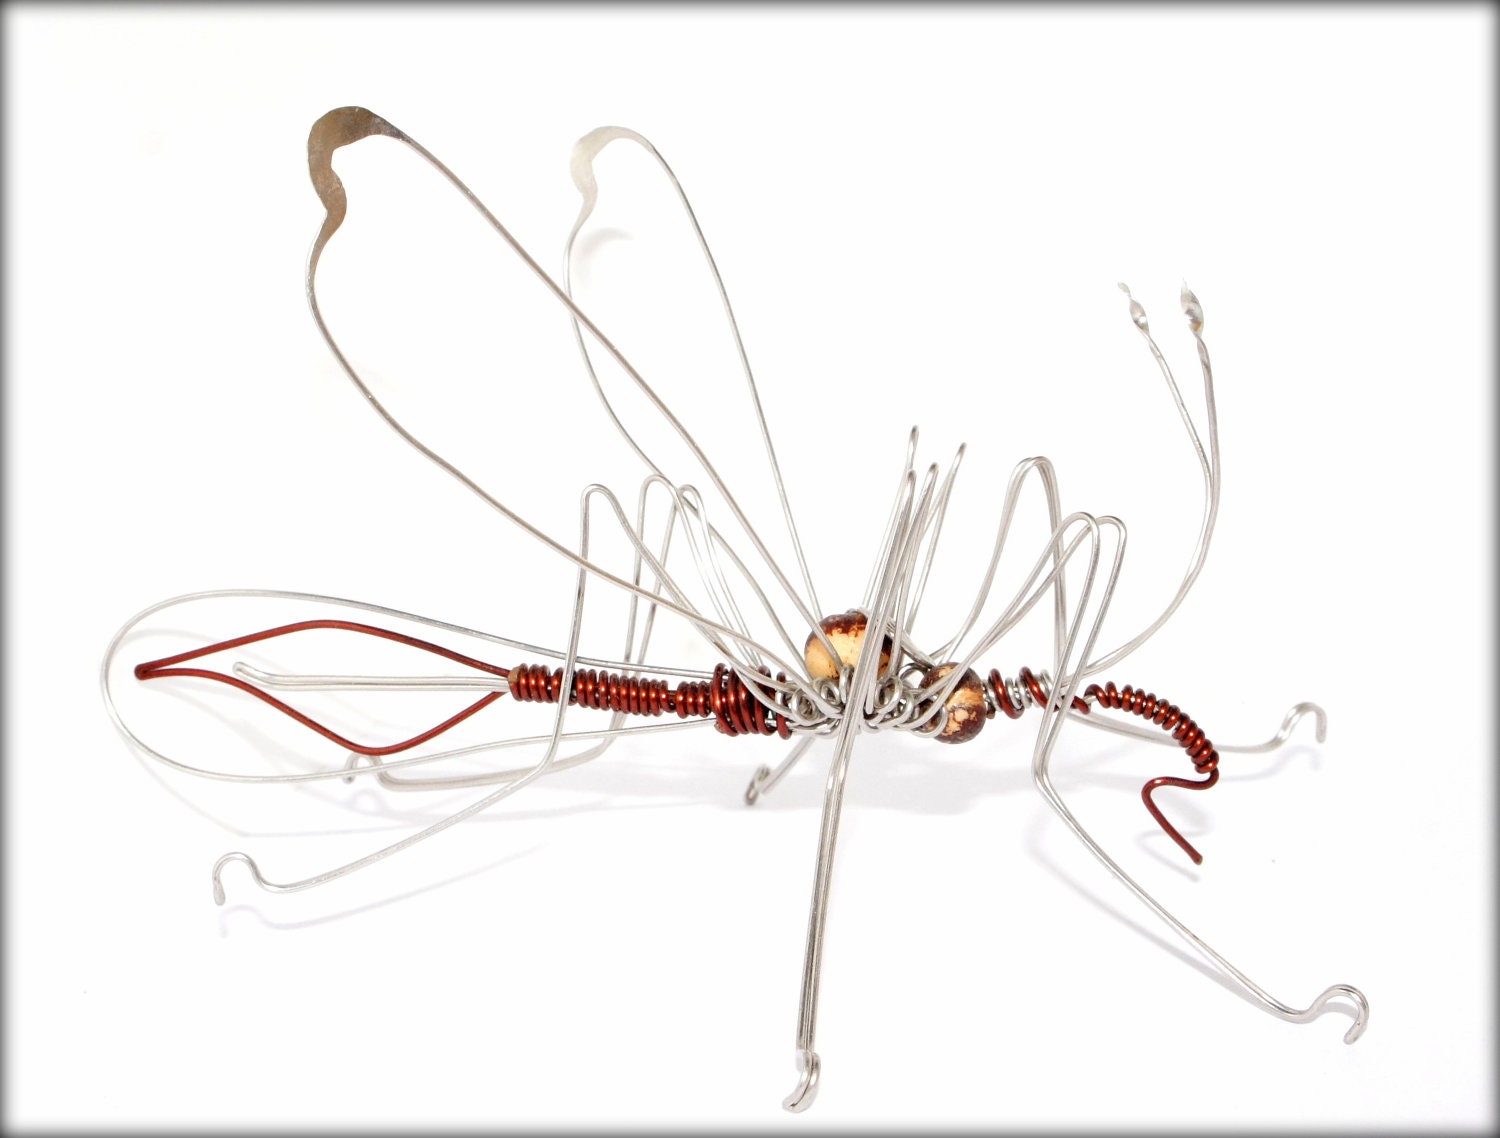 mosquito wire sculpture made of stainless steel and enameled copper - raizesimaginarias